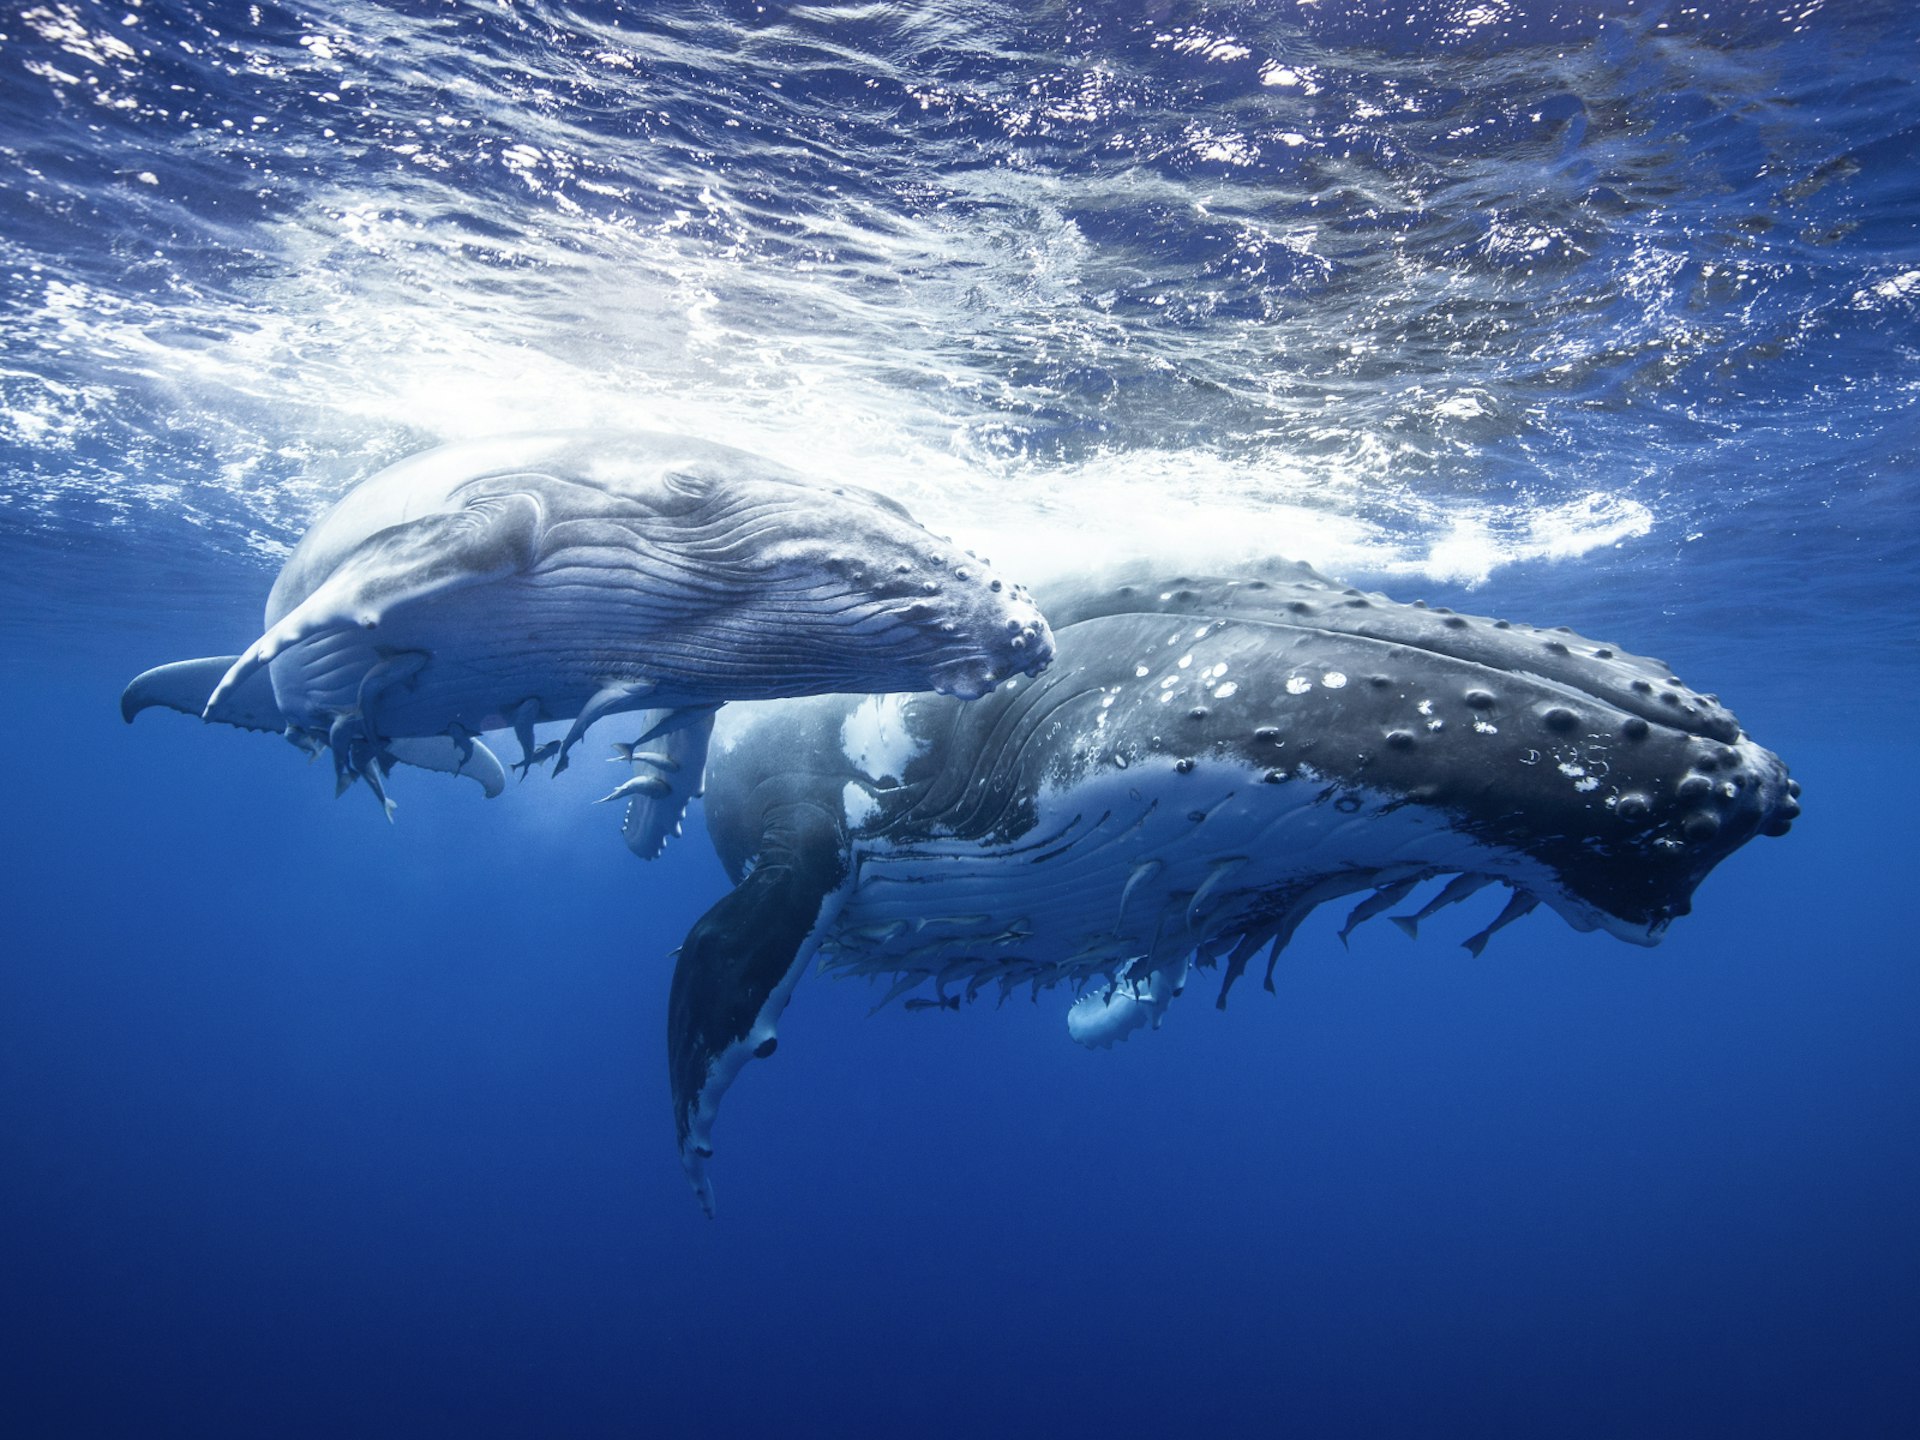 An underwater upwards angle of a humpback and her calf, who have recently broken the surface and have white churned-up water above them. Below is dark blue ocean